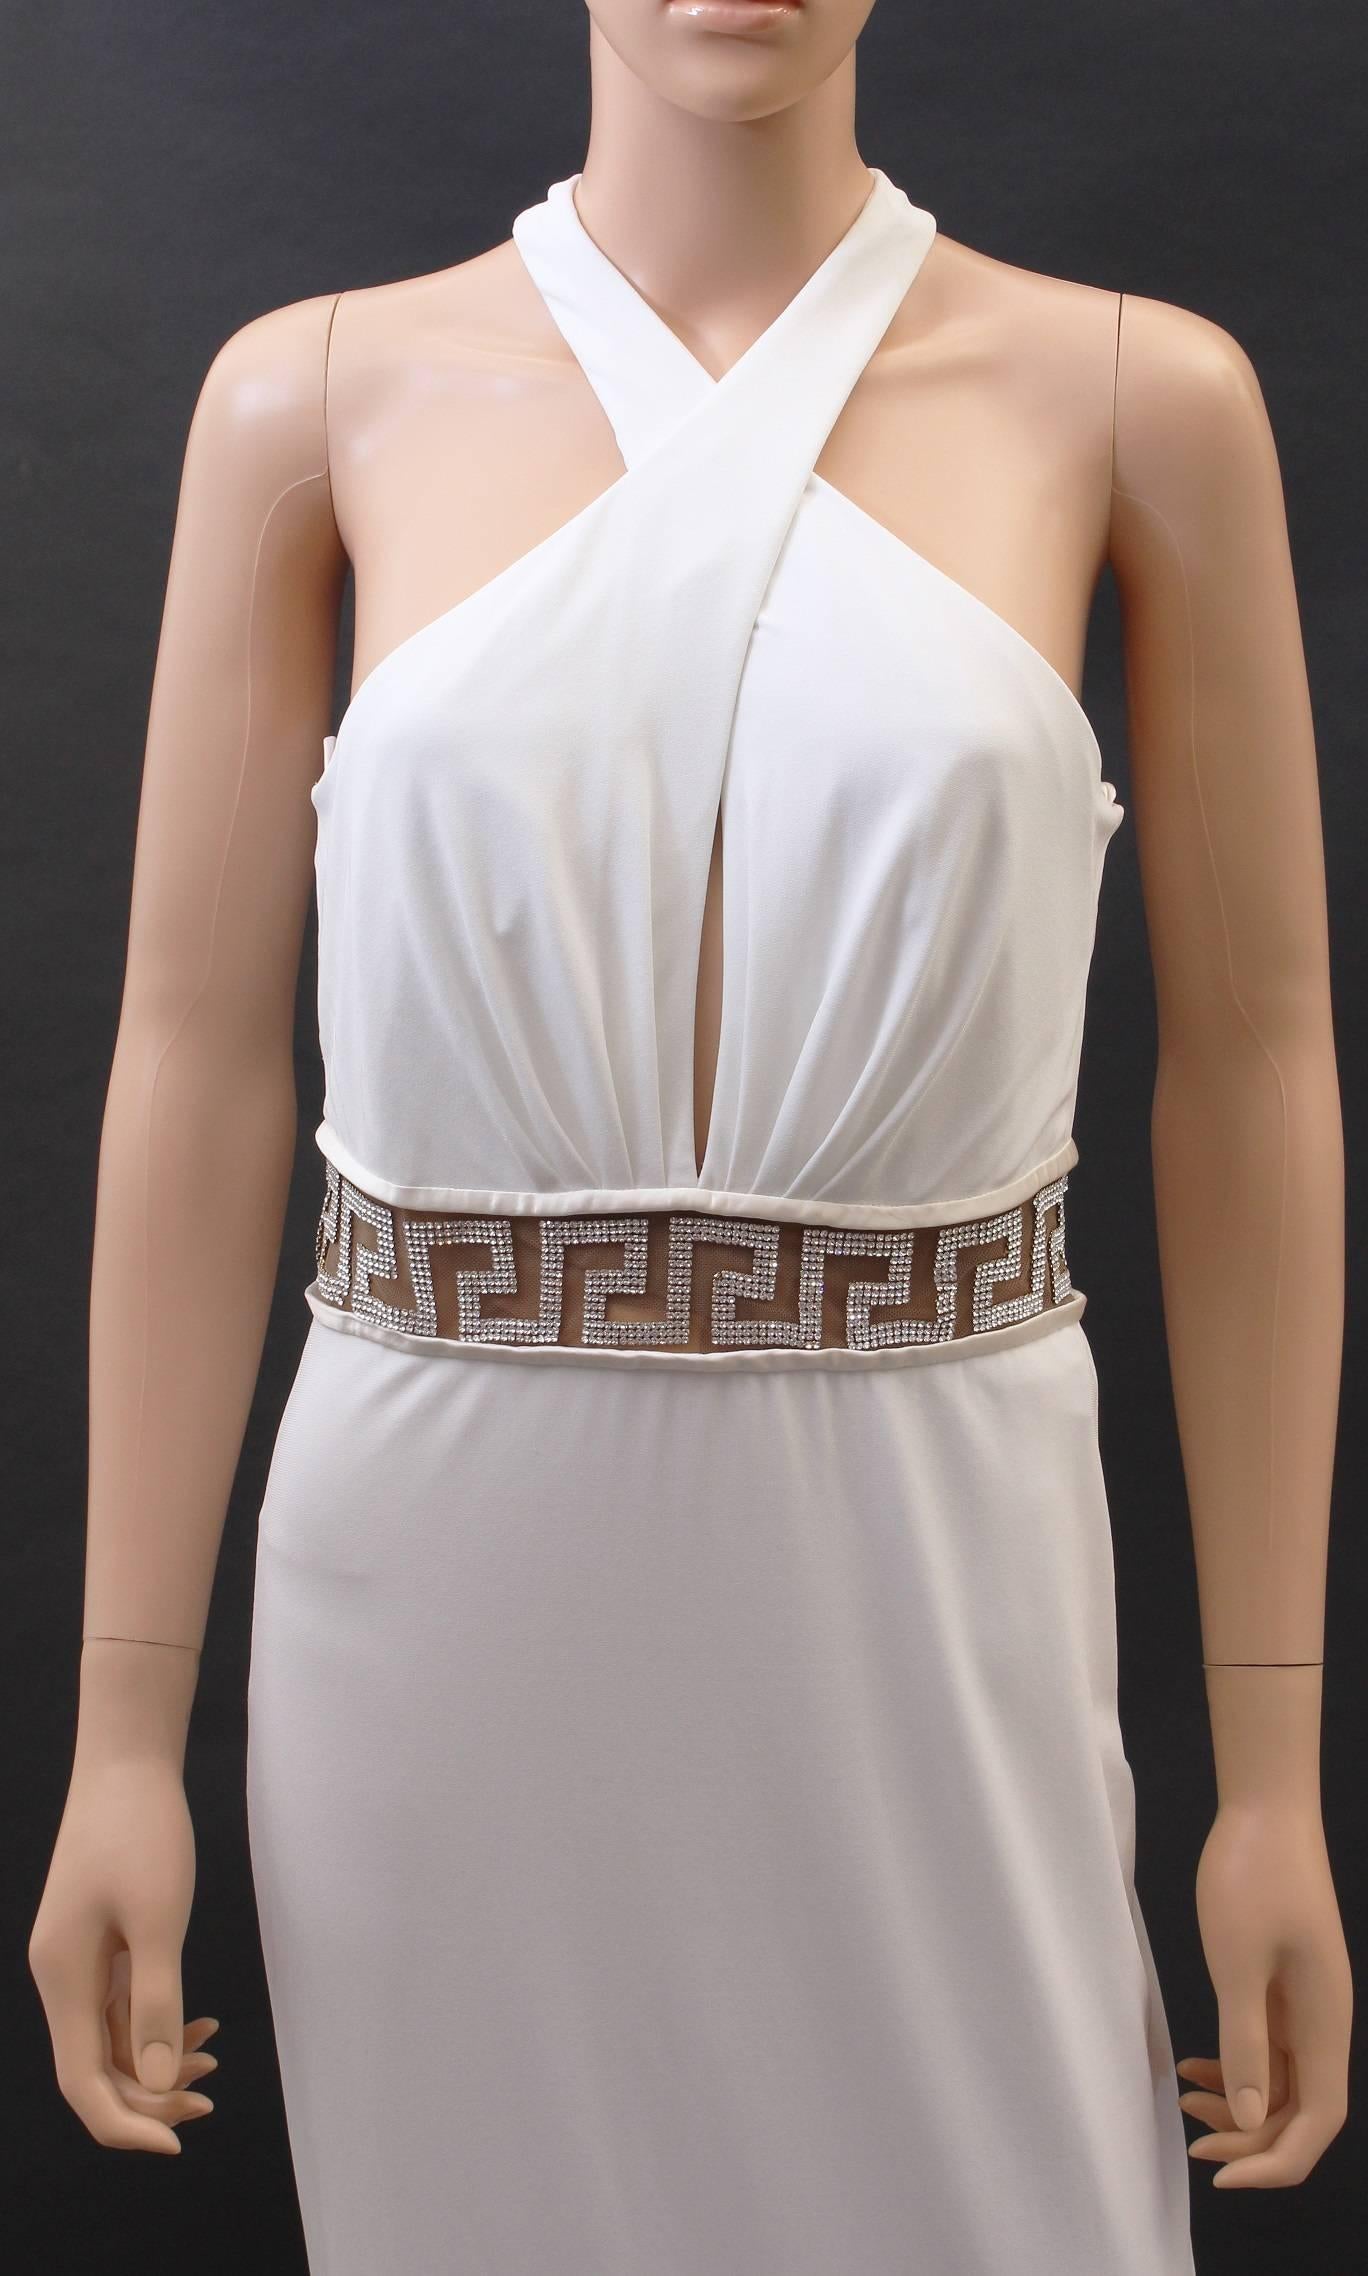 Versace Crystal Embellished white gown

IT size 44 - US 8

New, with tags.